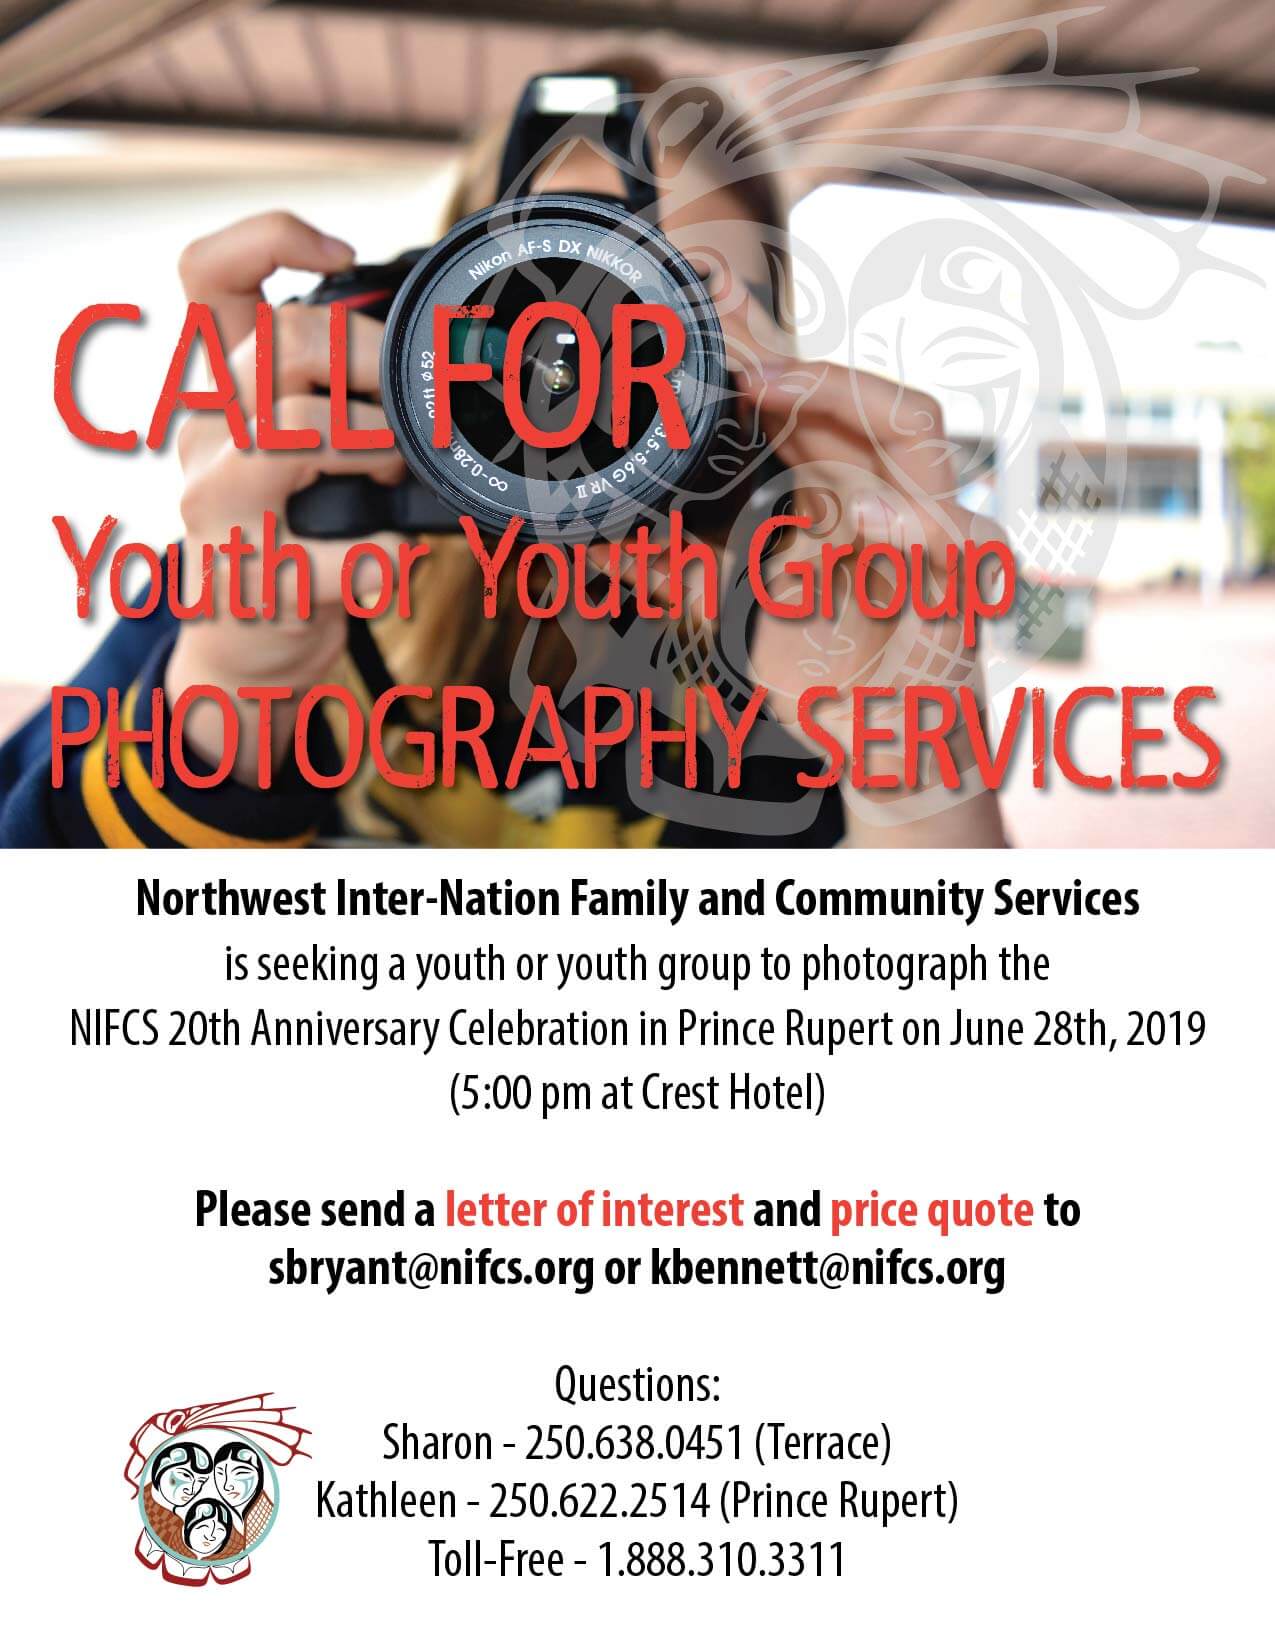 Call for Youth or Youth Group Photography Services